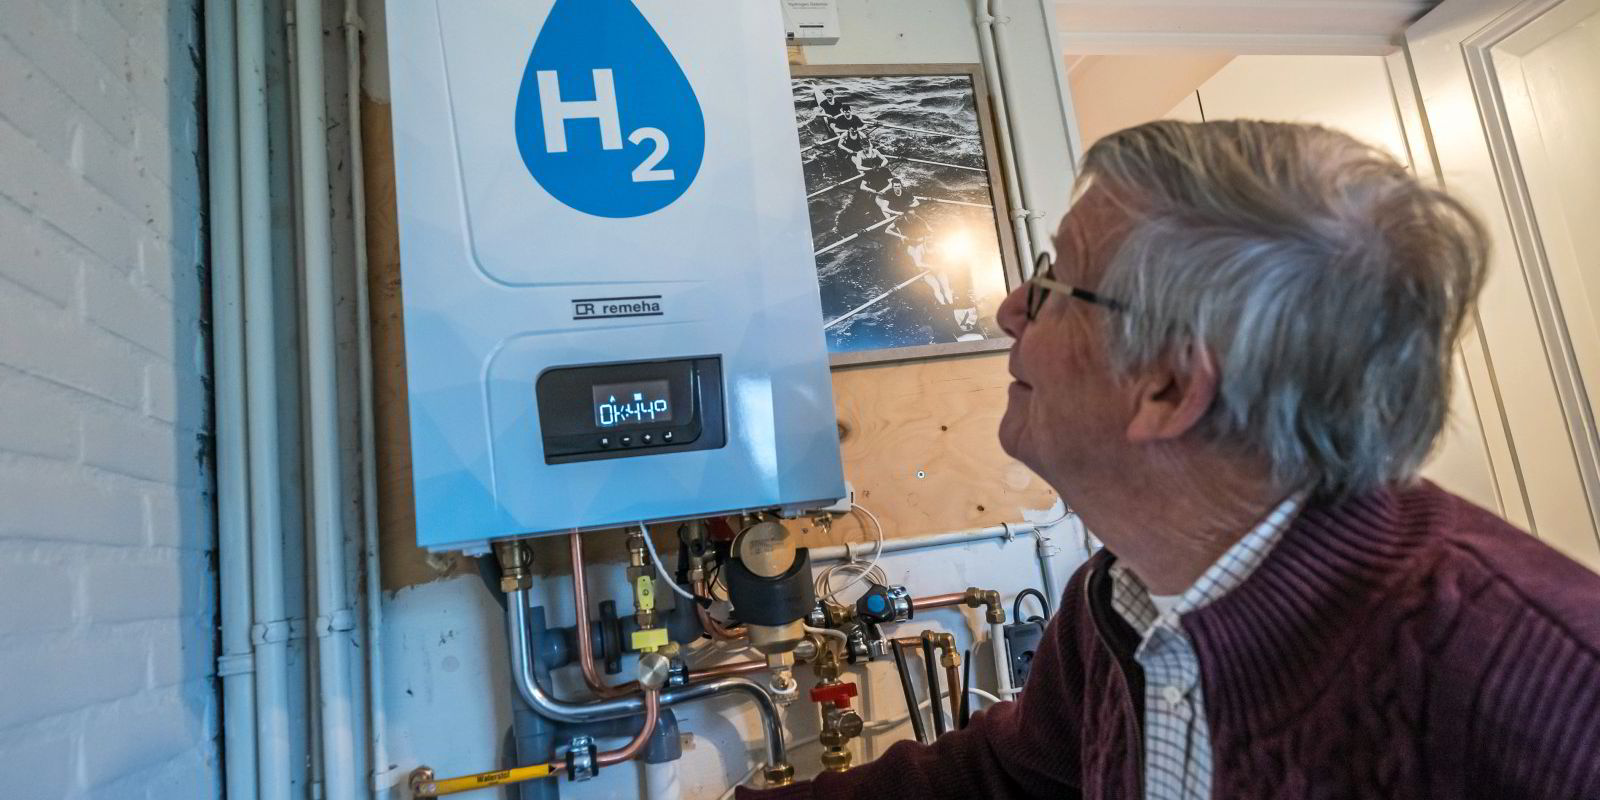 Green and blue hydrogen producers can break free of subsidies as soon as 2030 Deloitte